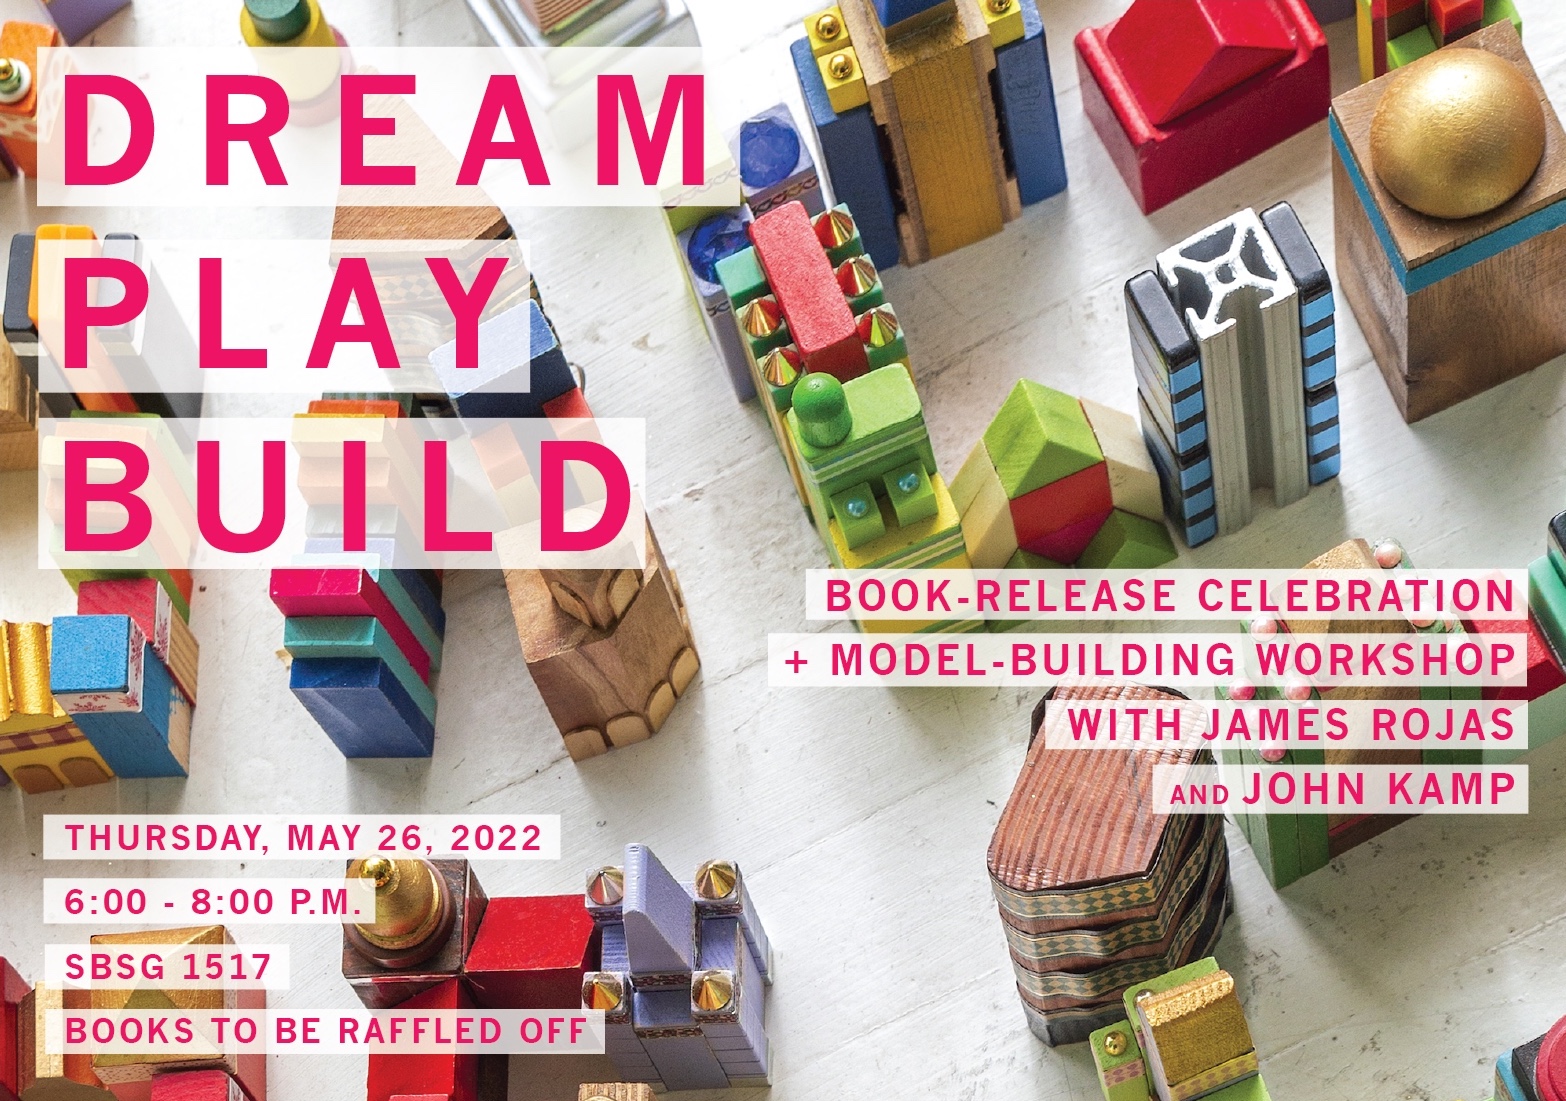 John Kamp of Prairieform and James Rojas of Place It! will be leading a talk and workshop on Dream Play Build at UC - Irvine.